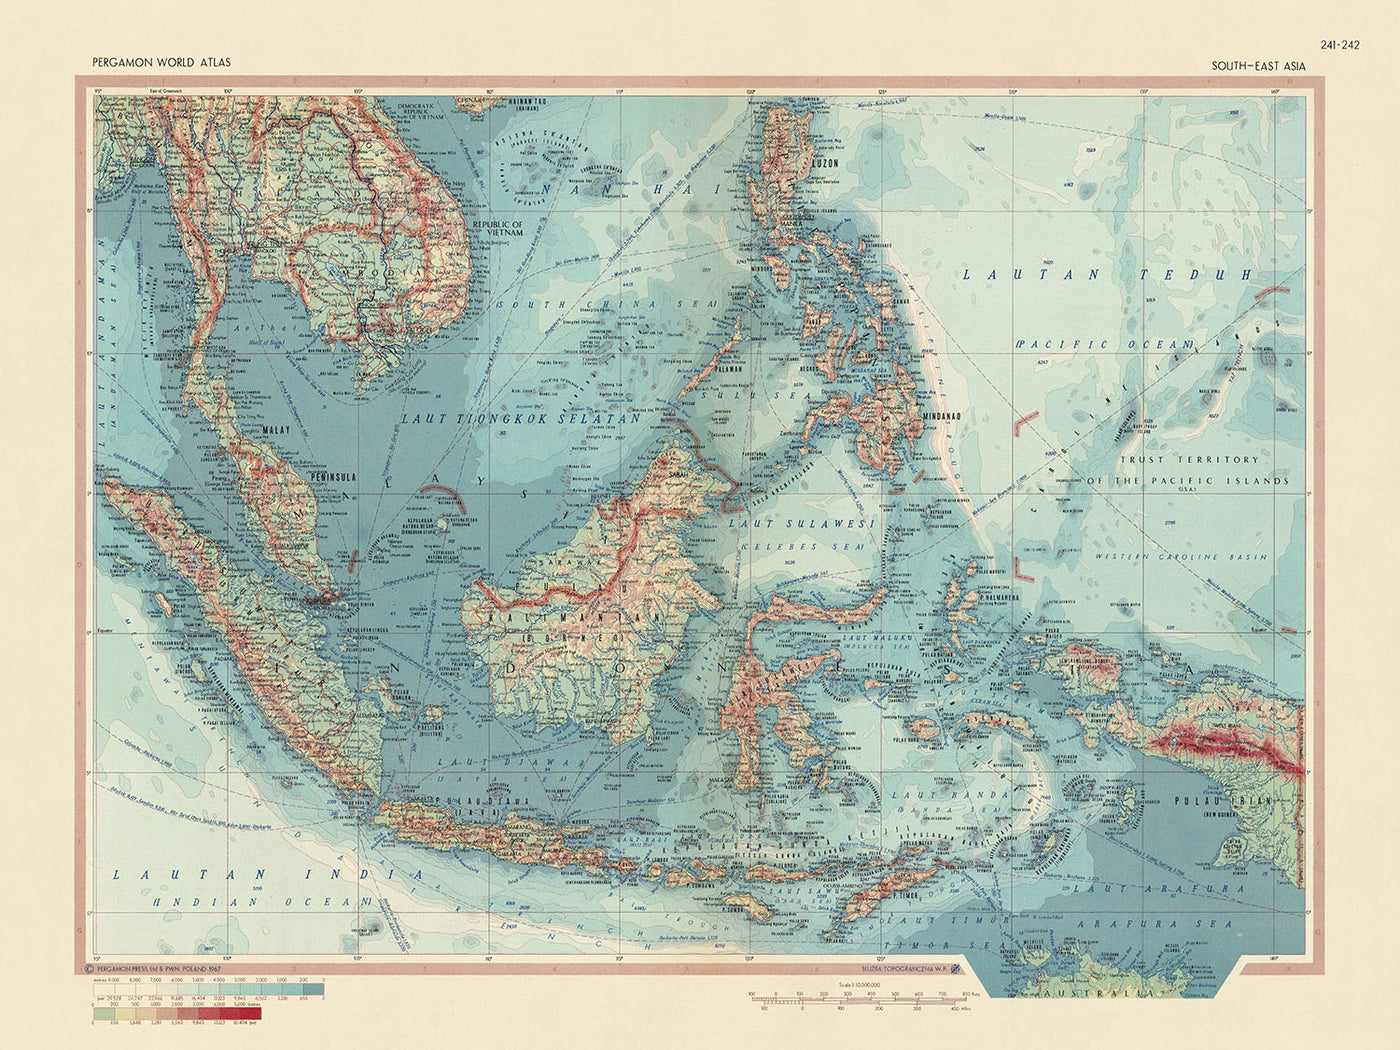 Old Map of Southeast Asia, 1967: Asiatic or Malay Archipelago - Indonesia, Malaysia, Philippines, Brunei